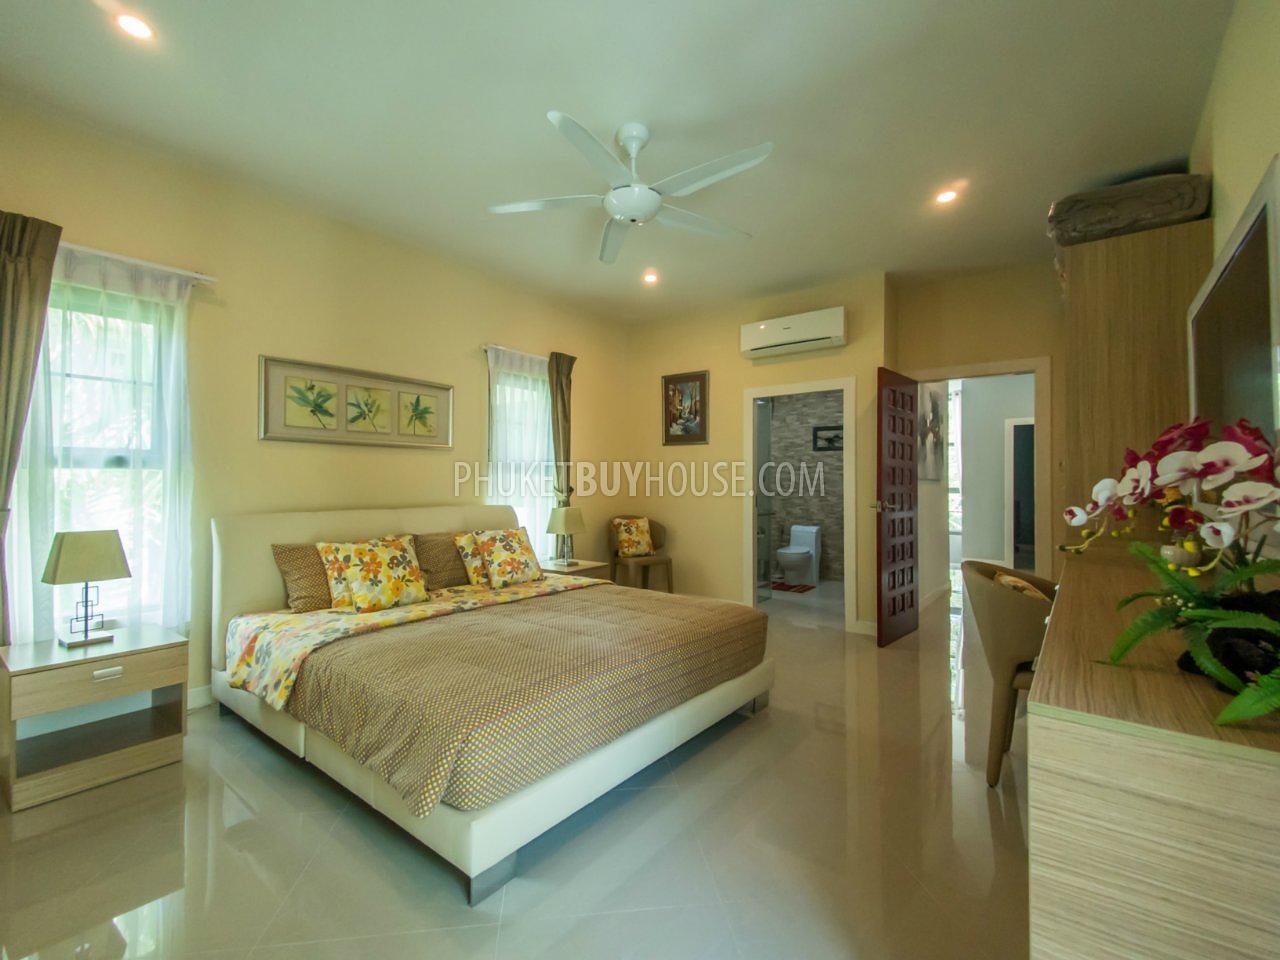 RAW6092: Beautiful 3 (up to 5) bedrooms Villa in Rawai with office and gym. Photo #32